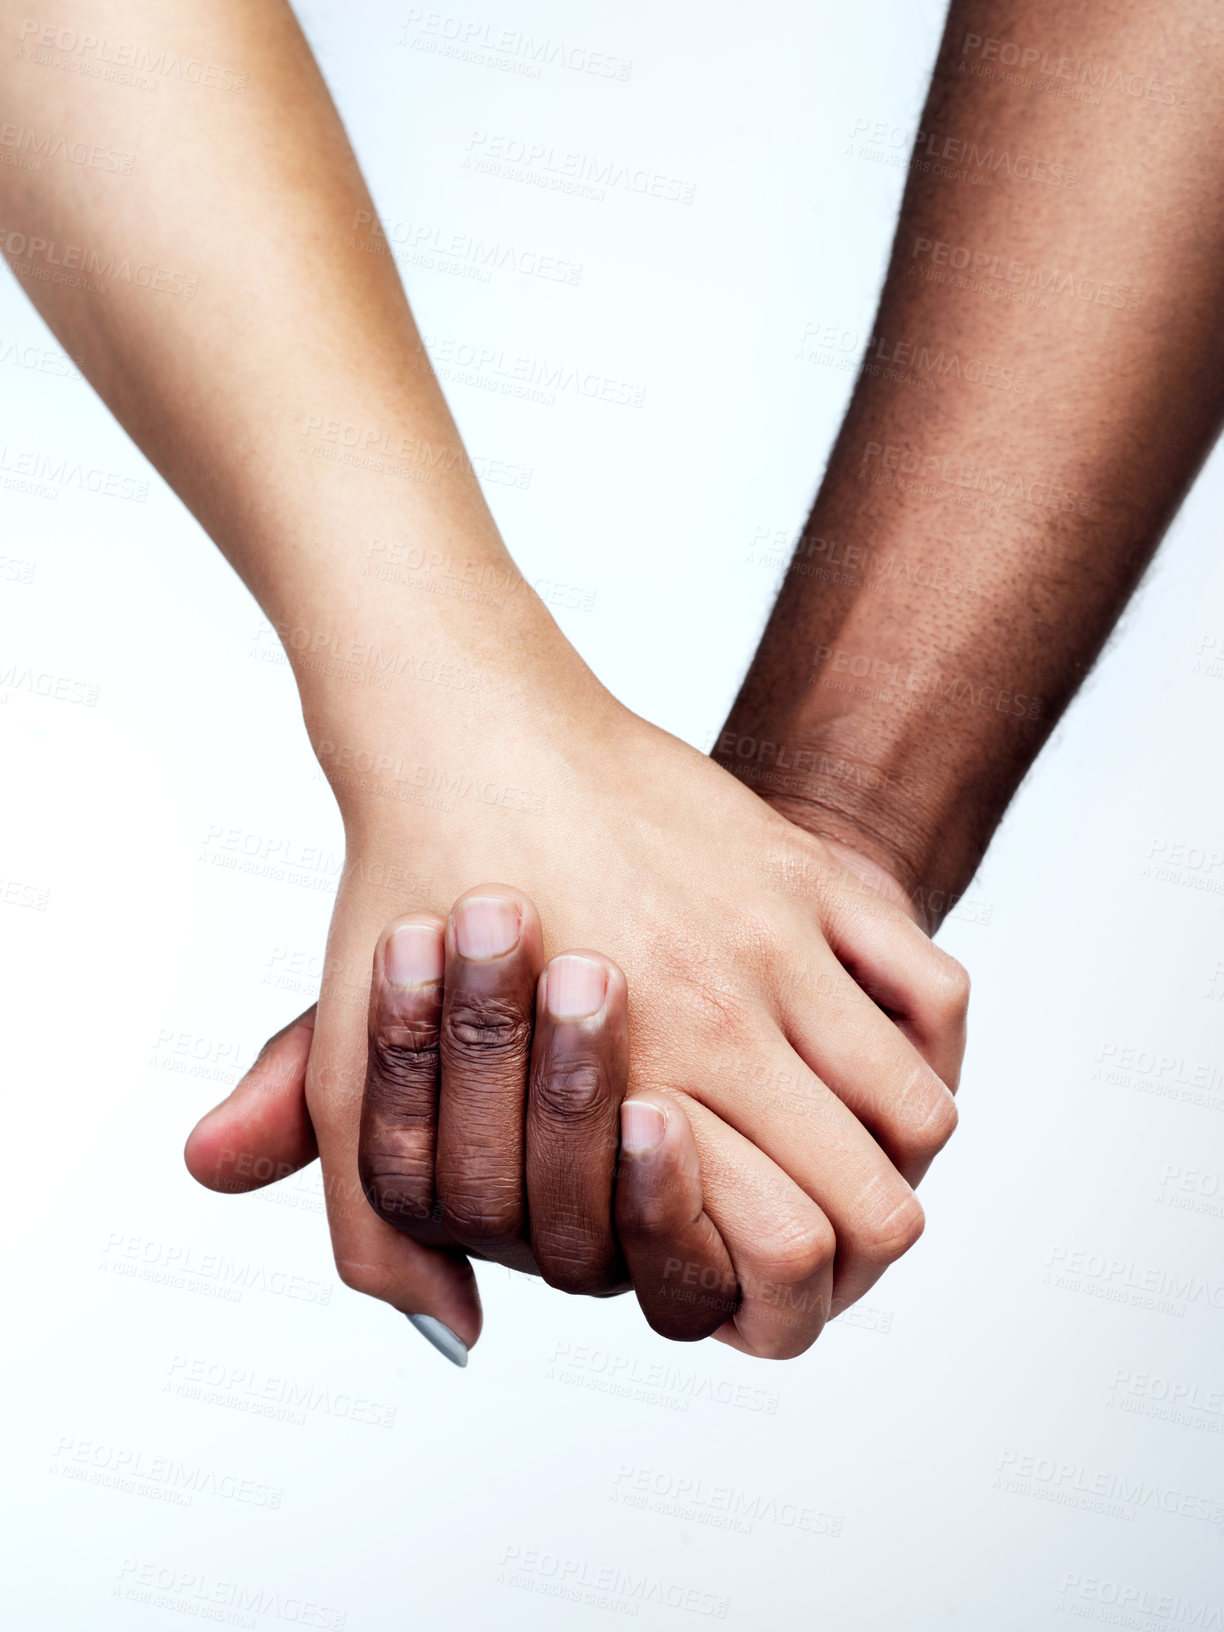 Buy stock photo Studio shot of two unrecognizable people holding hands against a grey background